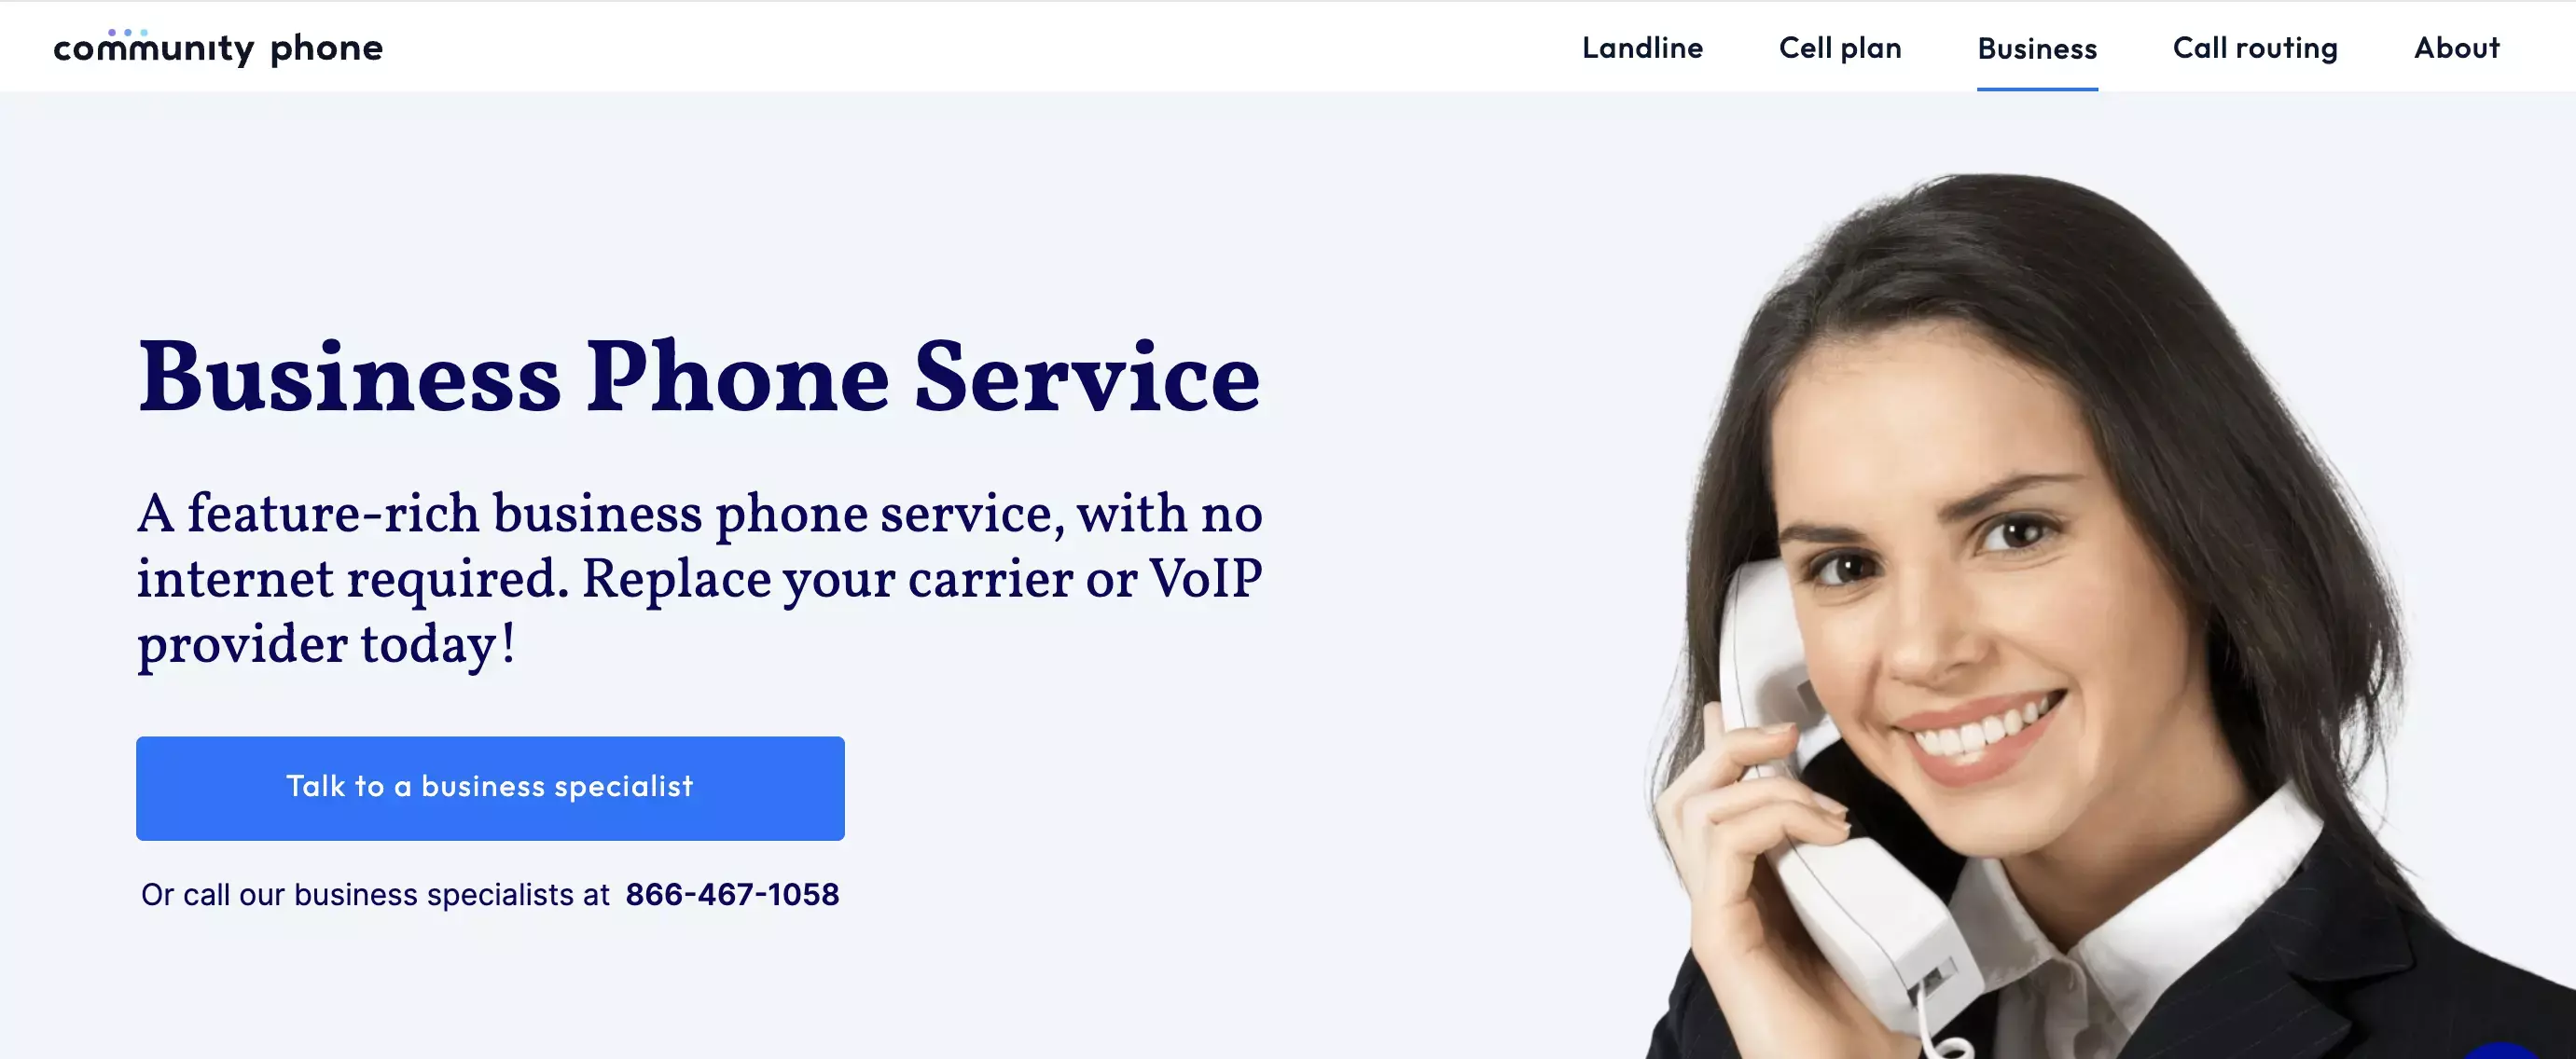 Image of Community Phone business service